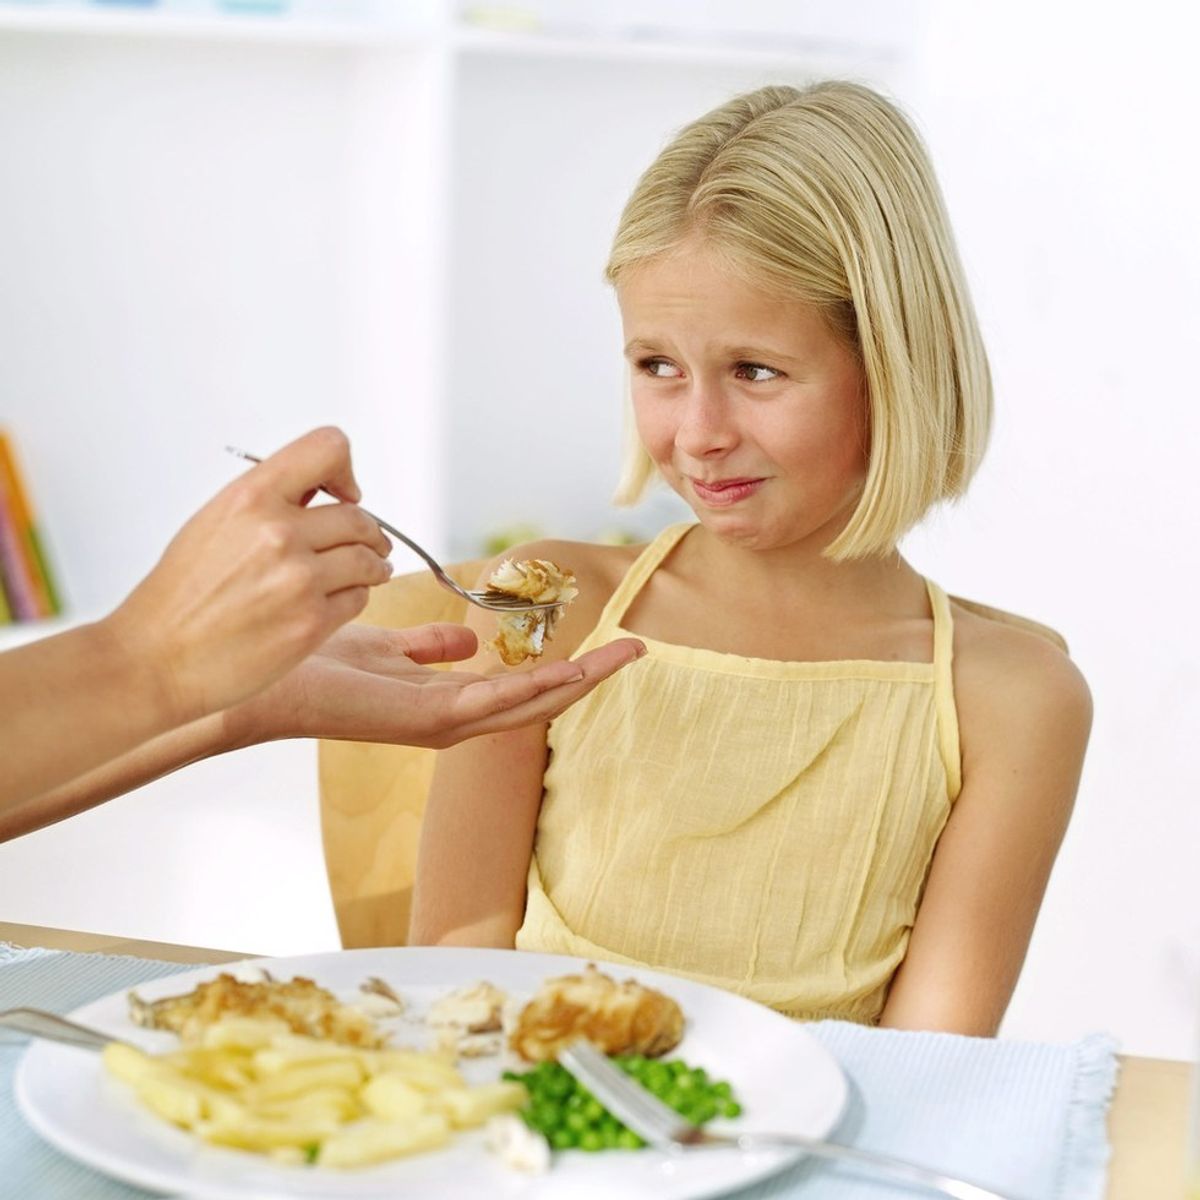 10 Struggles of Being a Picky Eater